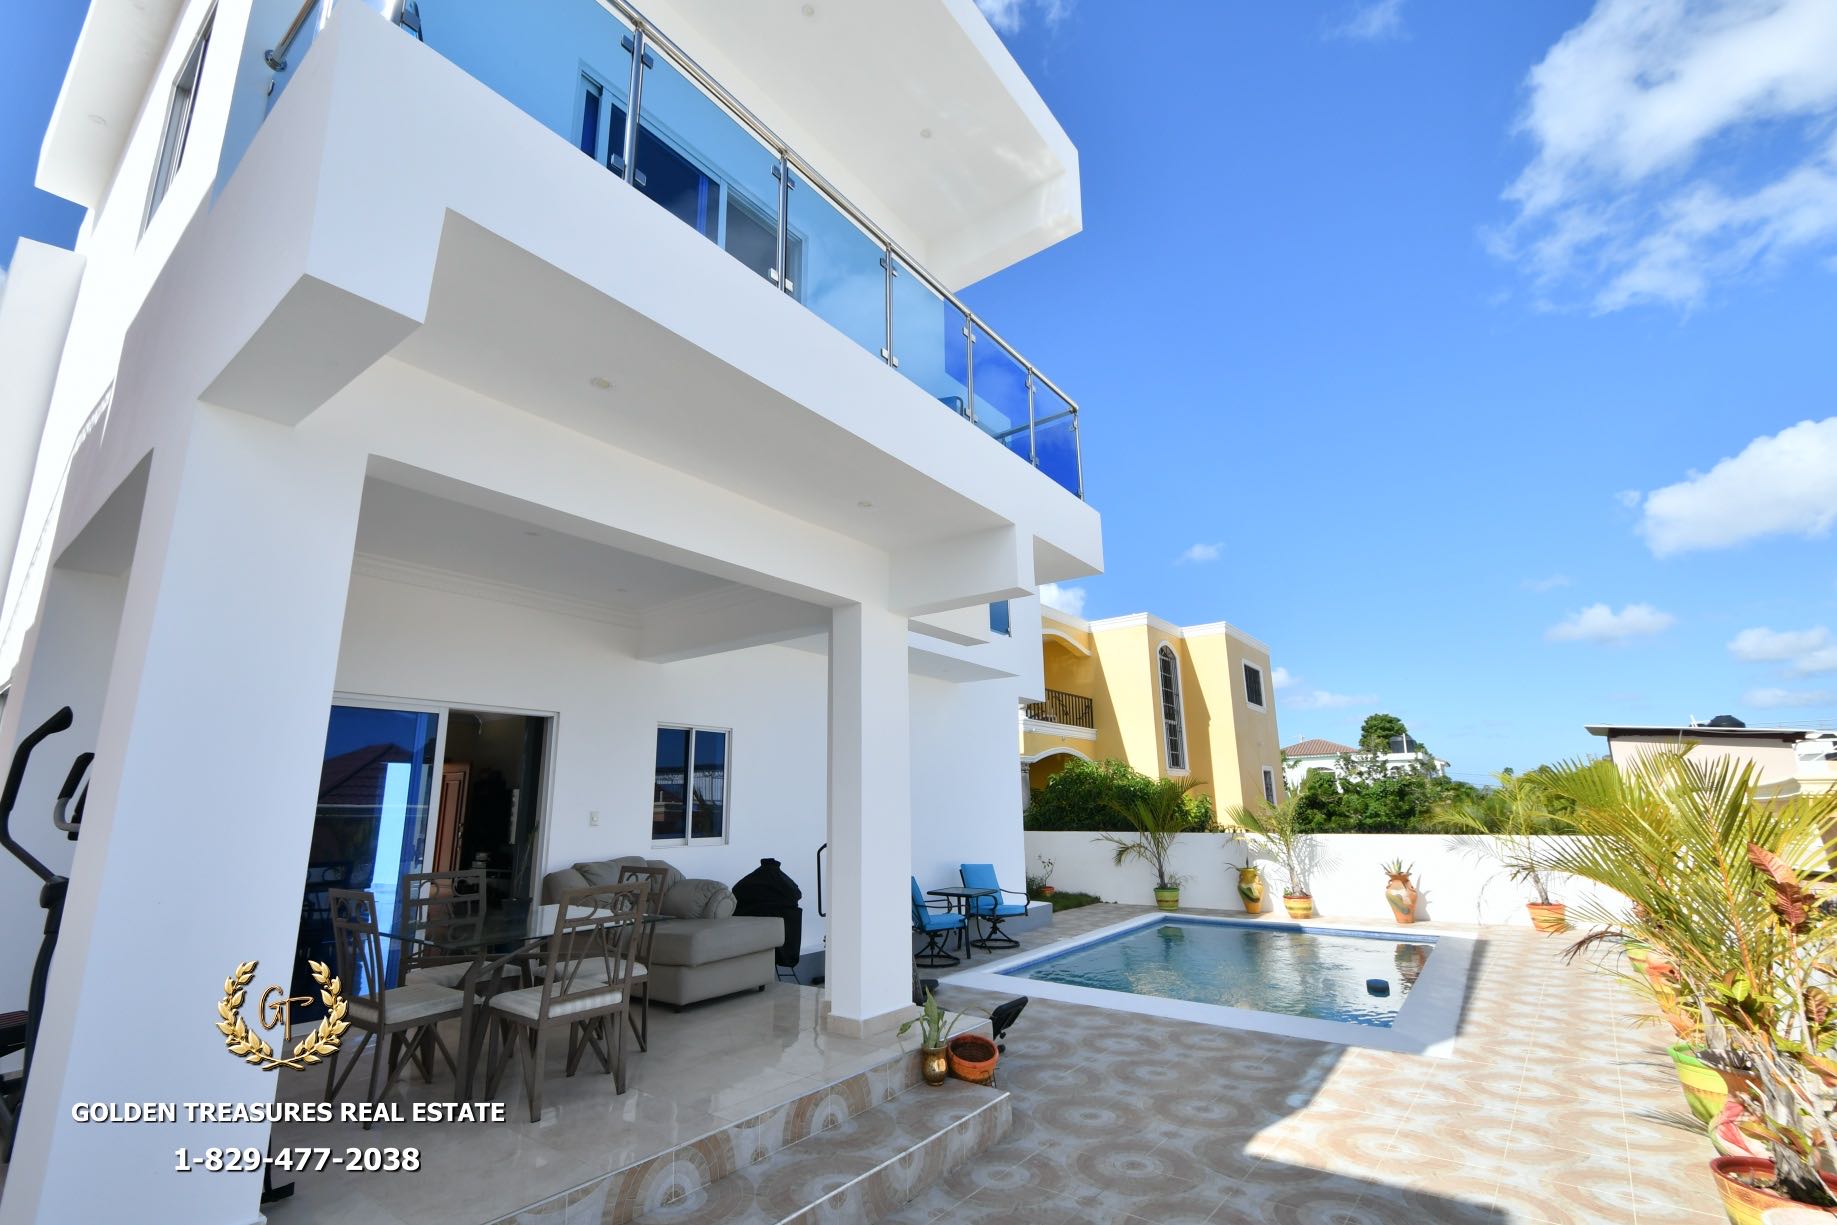 The Ocean view house in Puerto Plata